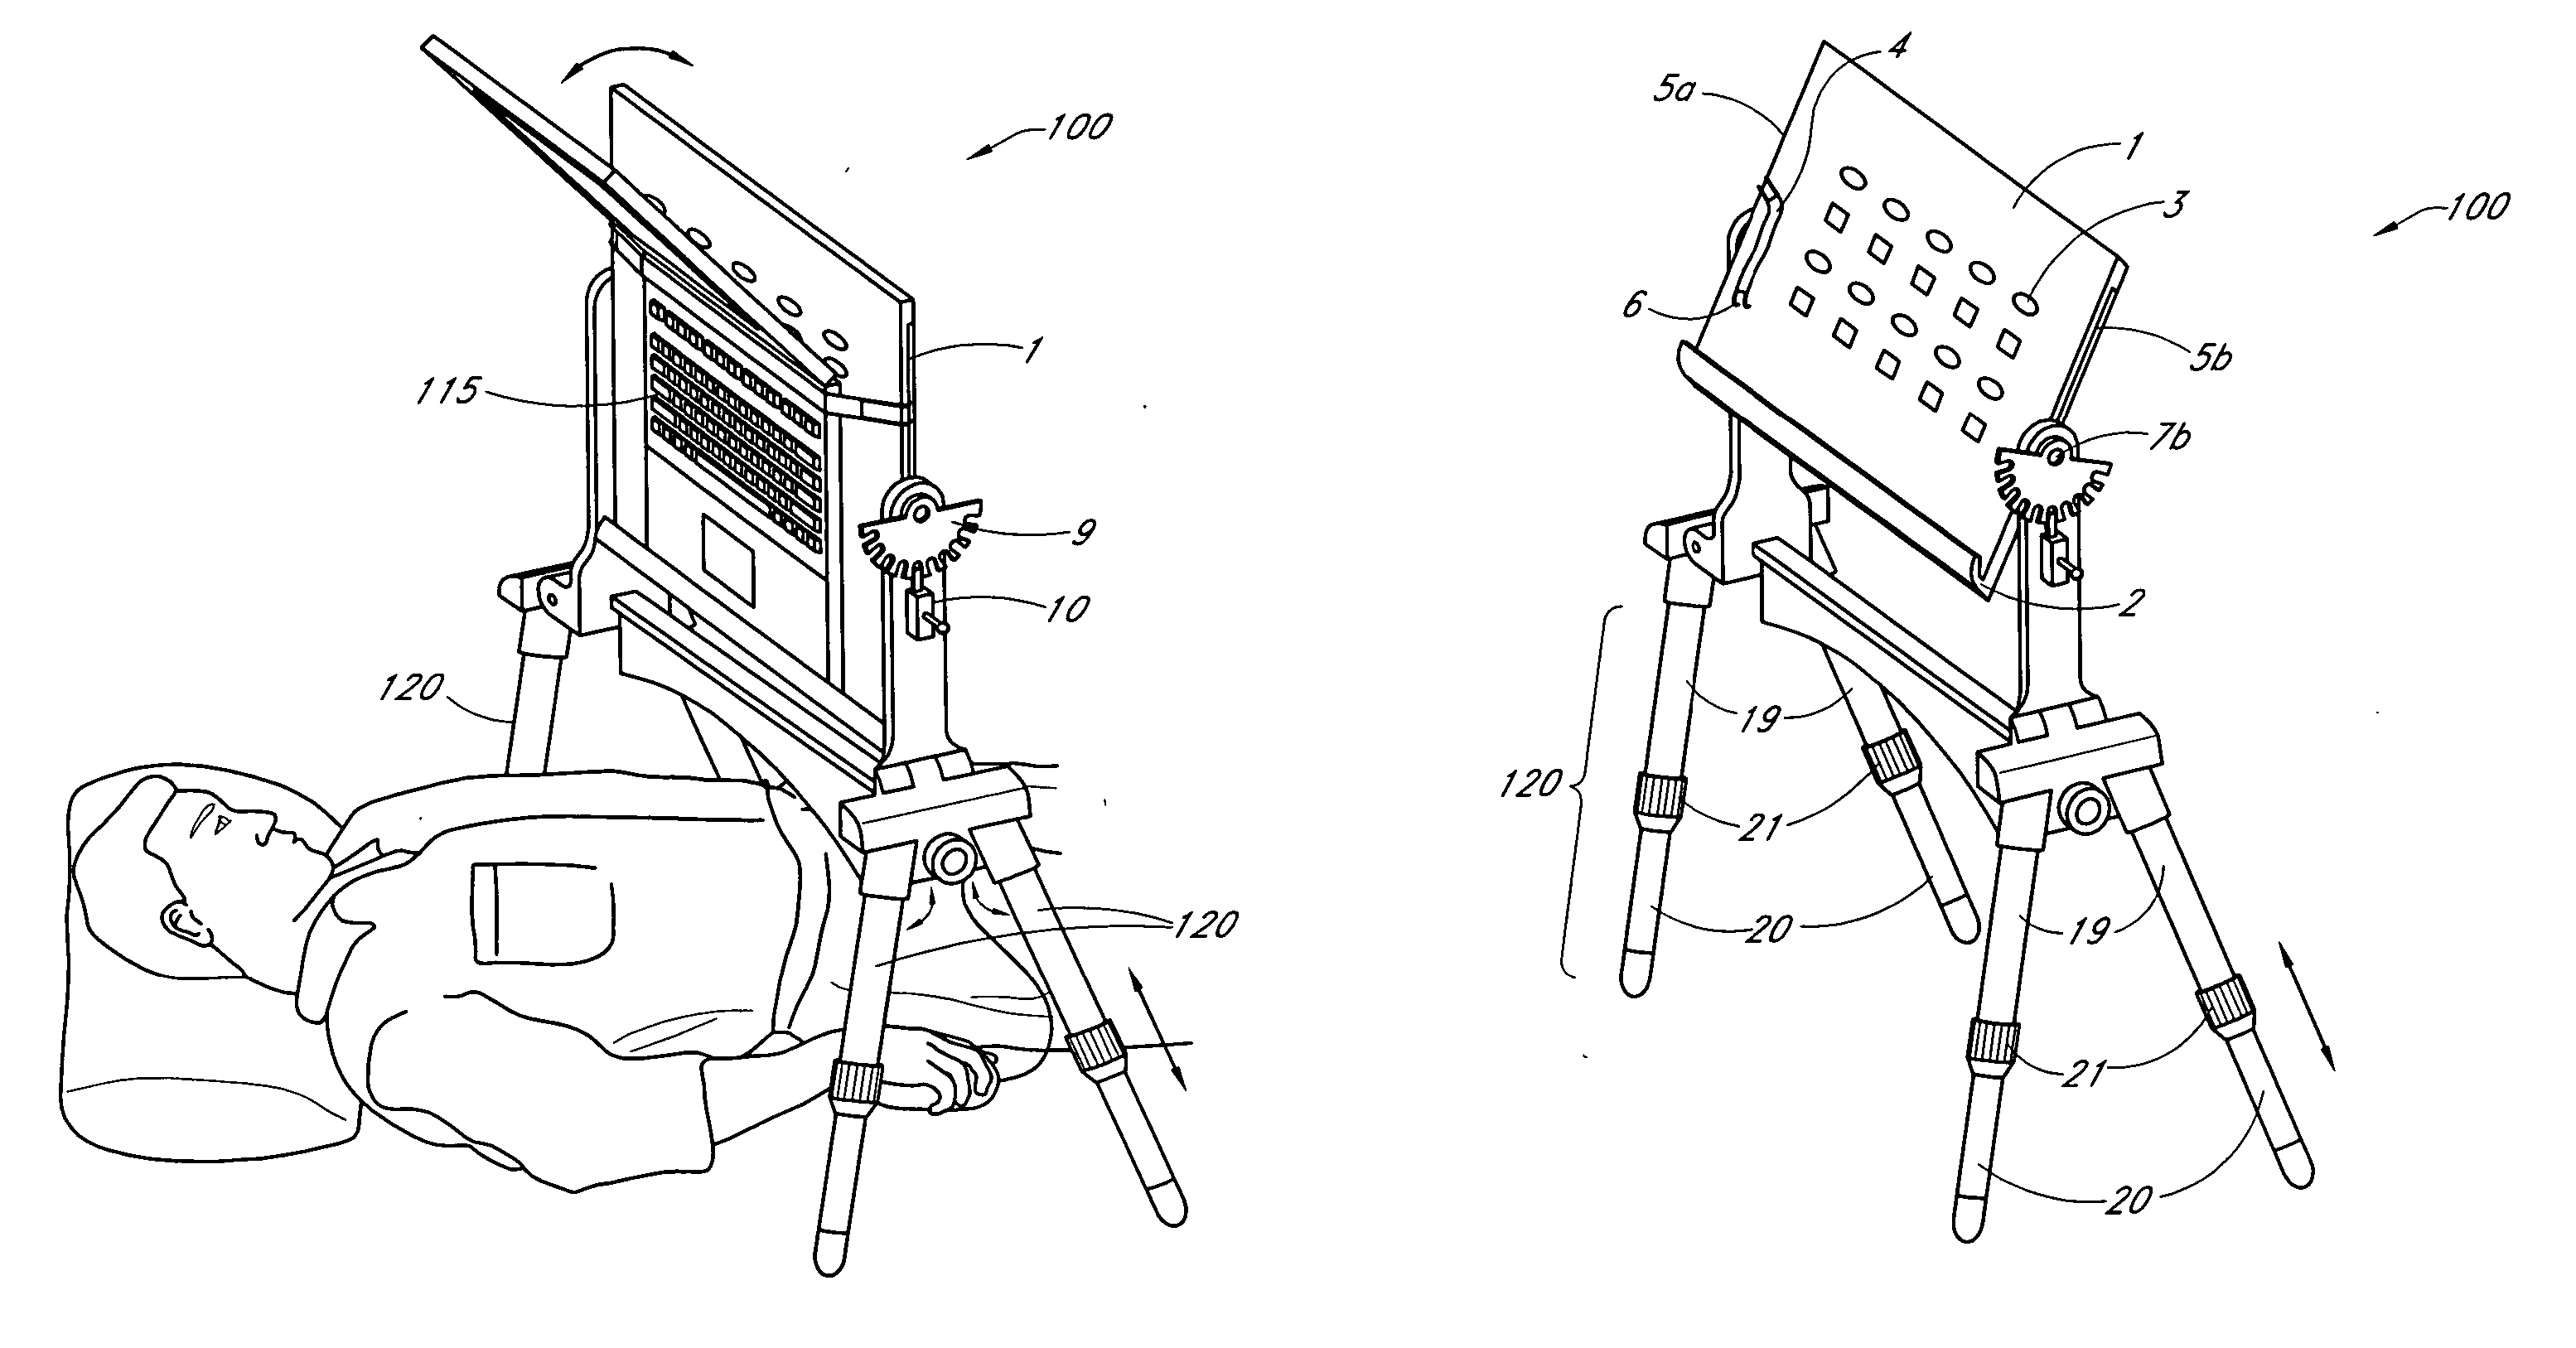 Portable support device